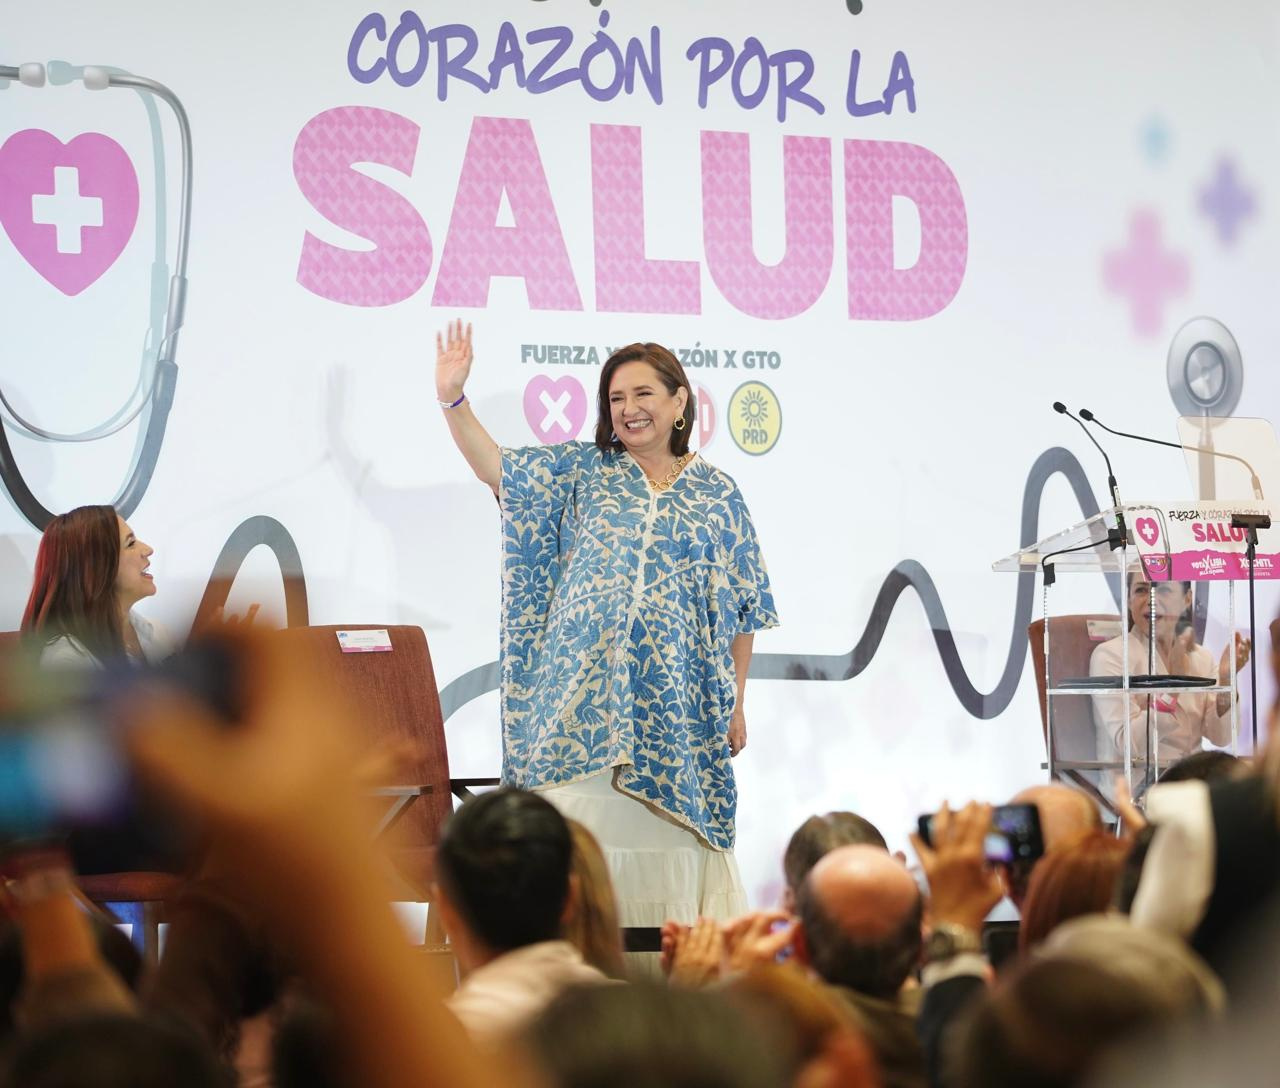 opposition-candidate-xochitl-galvez-promises-not-to-hire-cuban-doctors-if-she-wins-the-presidency-of-mexico